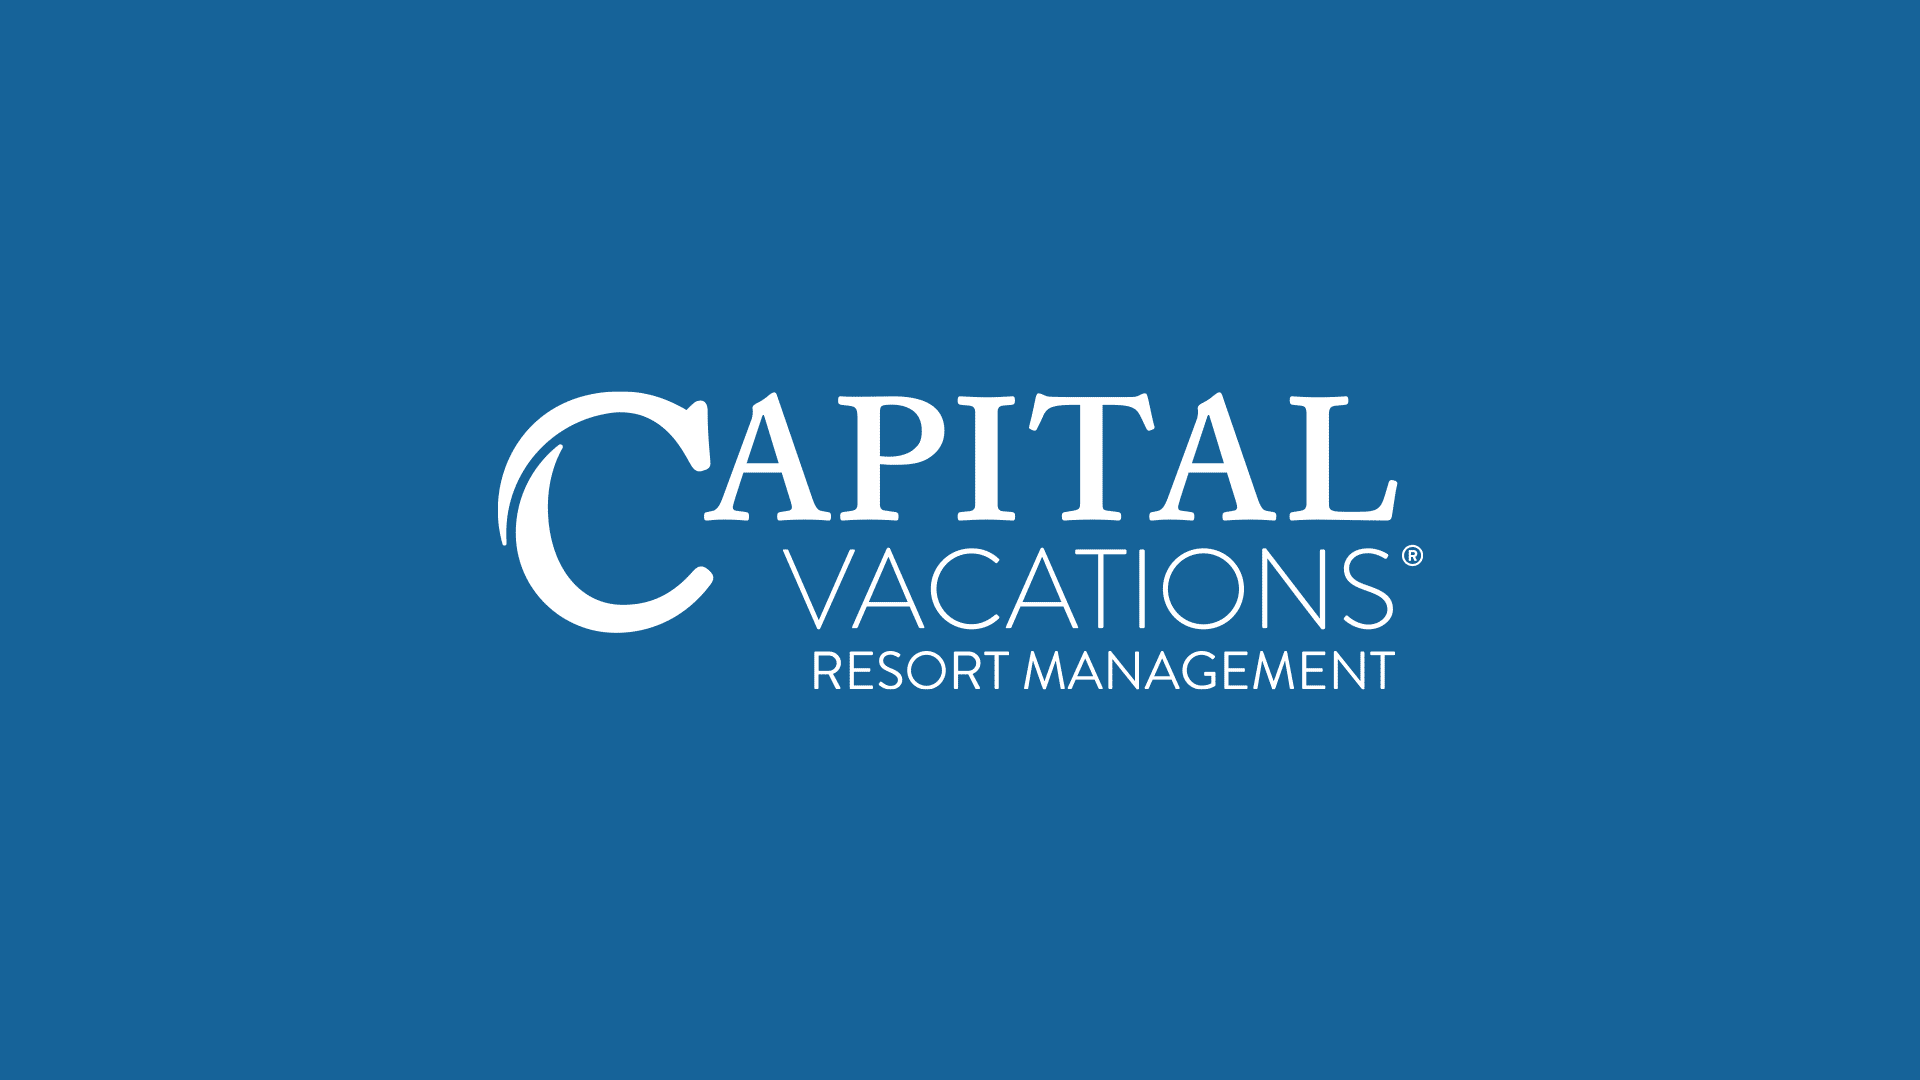 Capital Vacations announces it is on pace to sell 10,000 HOA-owned intervals in 2021 for its managed resorts that opted into their Guaranteed Sales program Feature Image